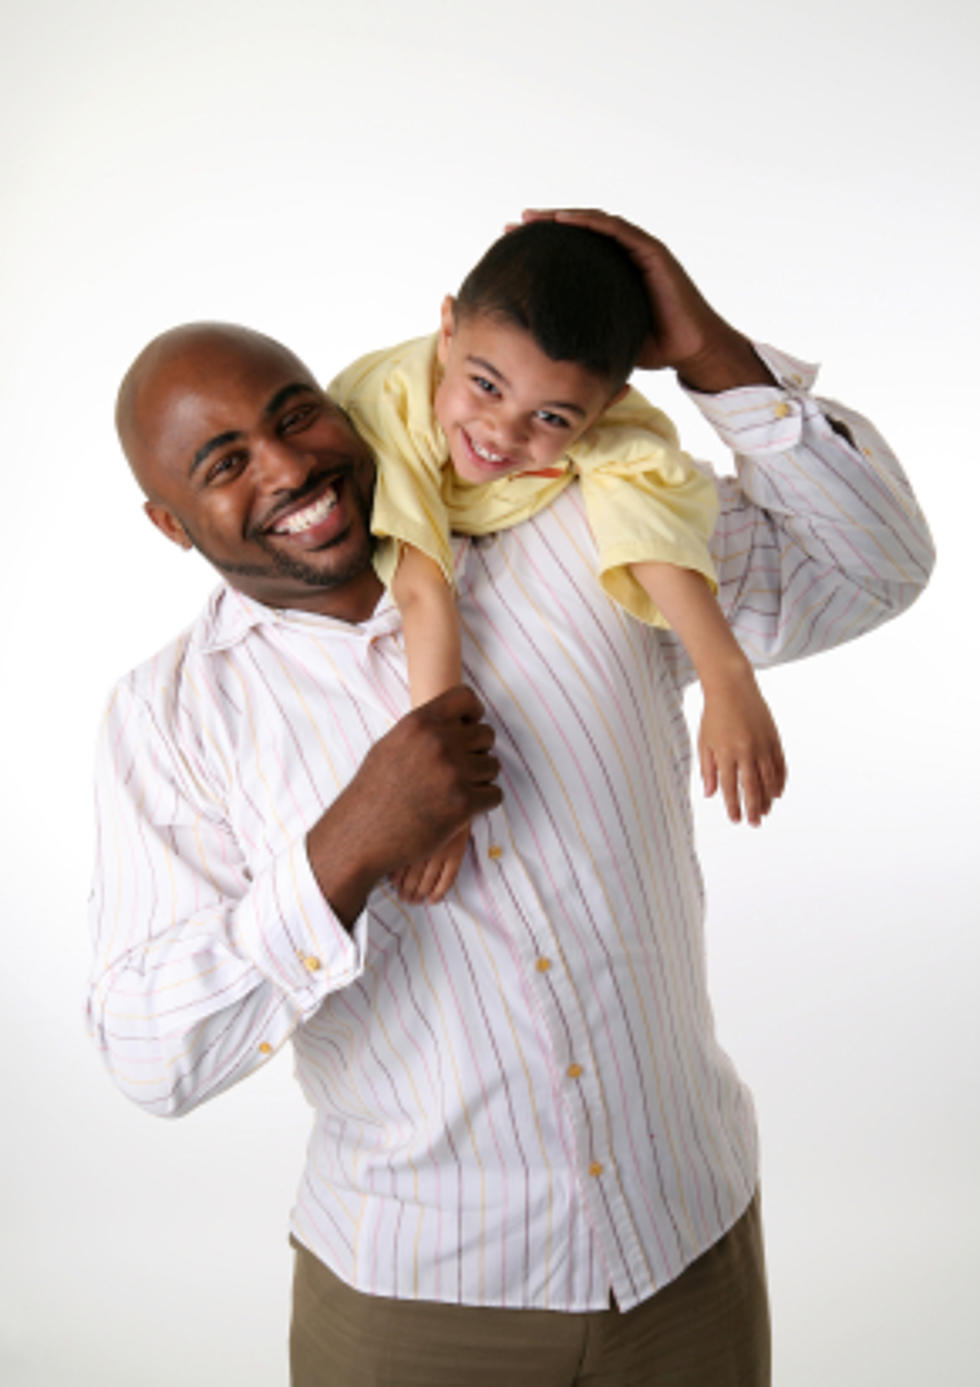 New Study Says Massachusetts #1 Best State For Working Fathers